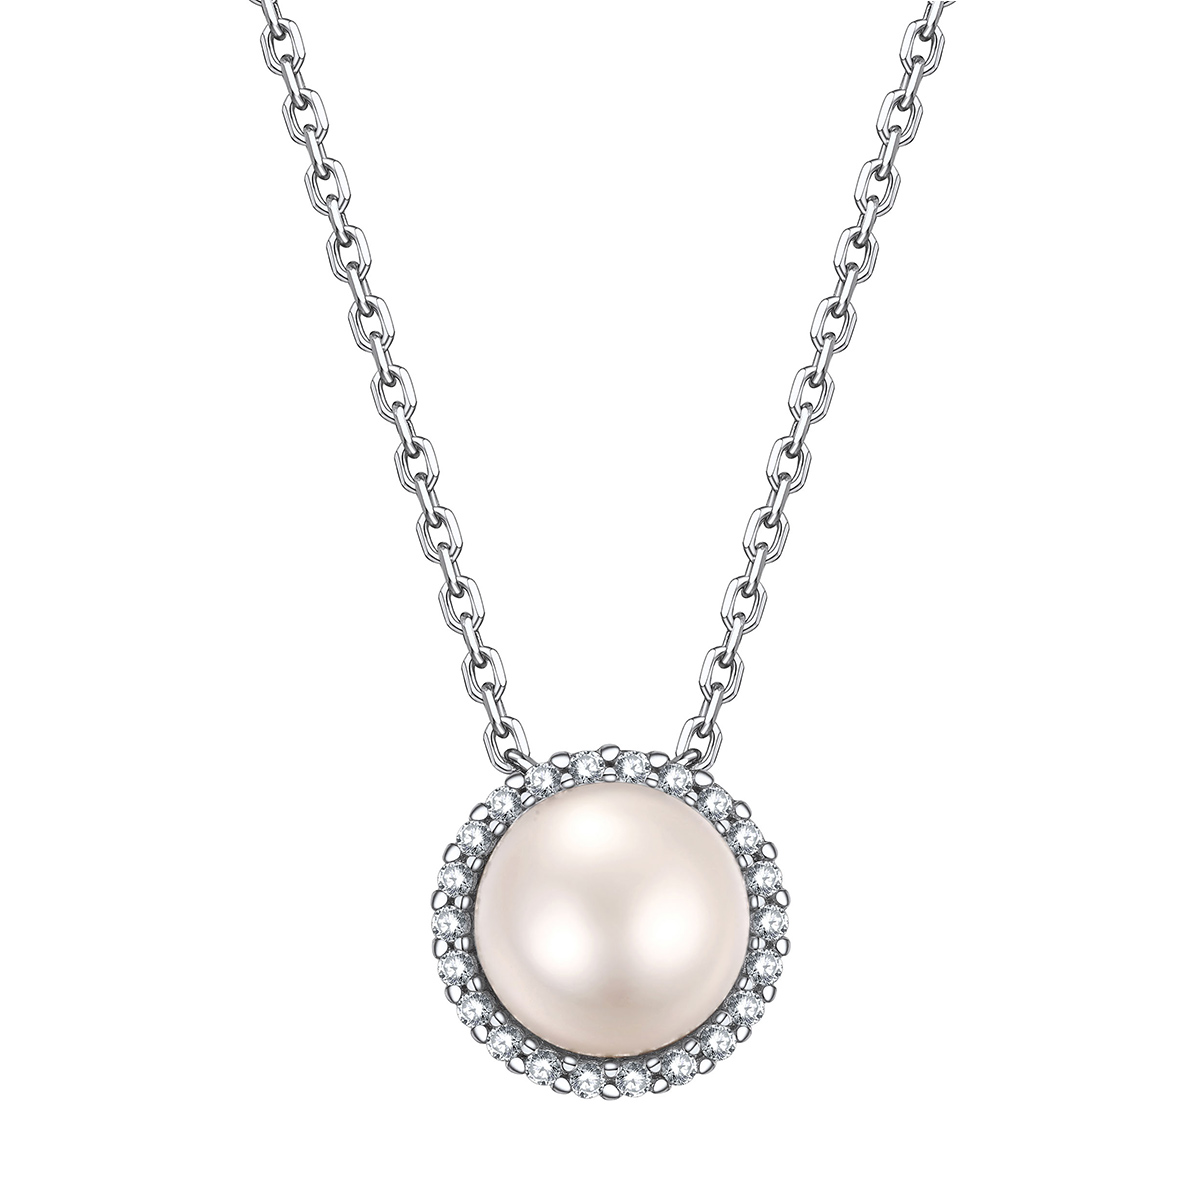 ChicSilver 925 Sterling Silver Halo Freshwater Pearl Necklace For Women